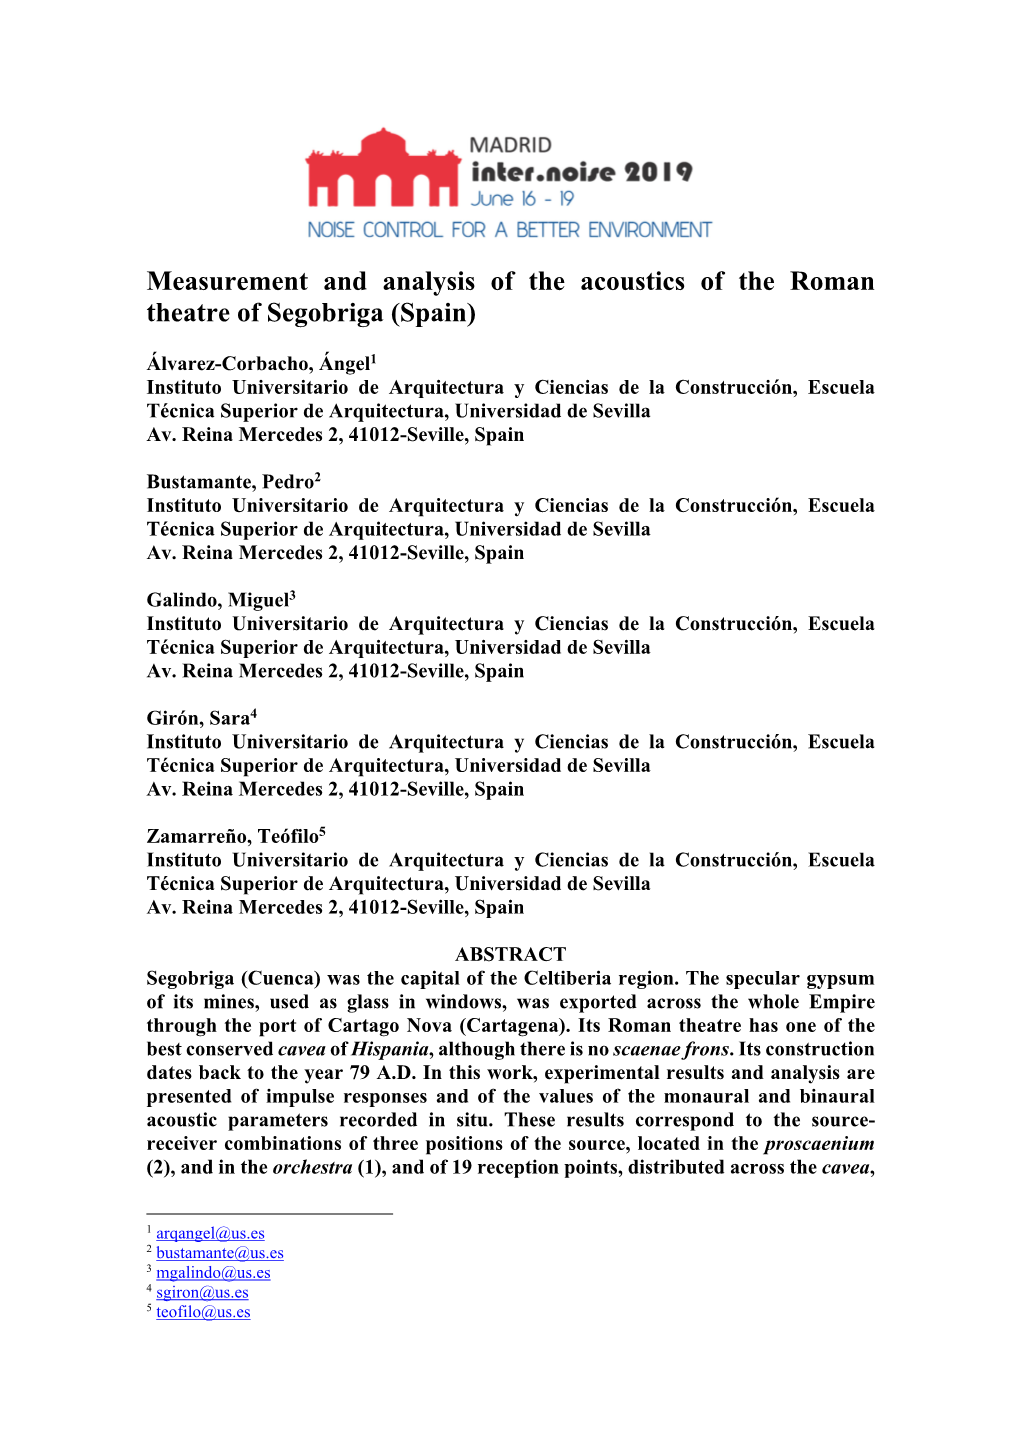 Measurement and Analysis of the Acoustics of the Roman Theatre of Segobriga (Spain)